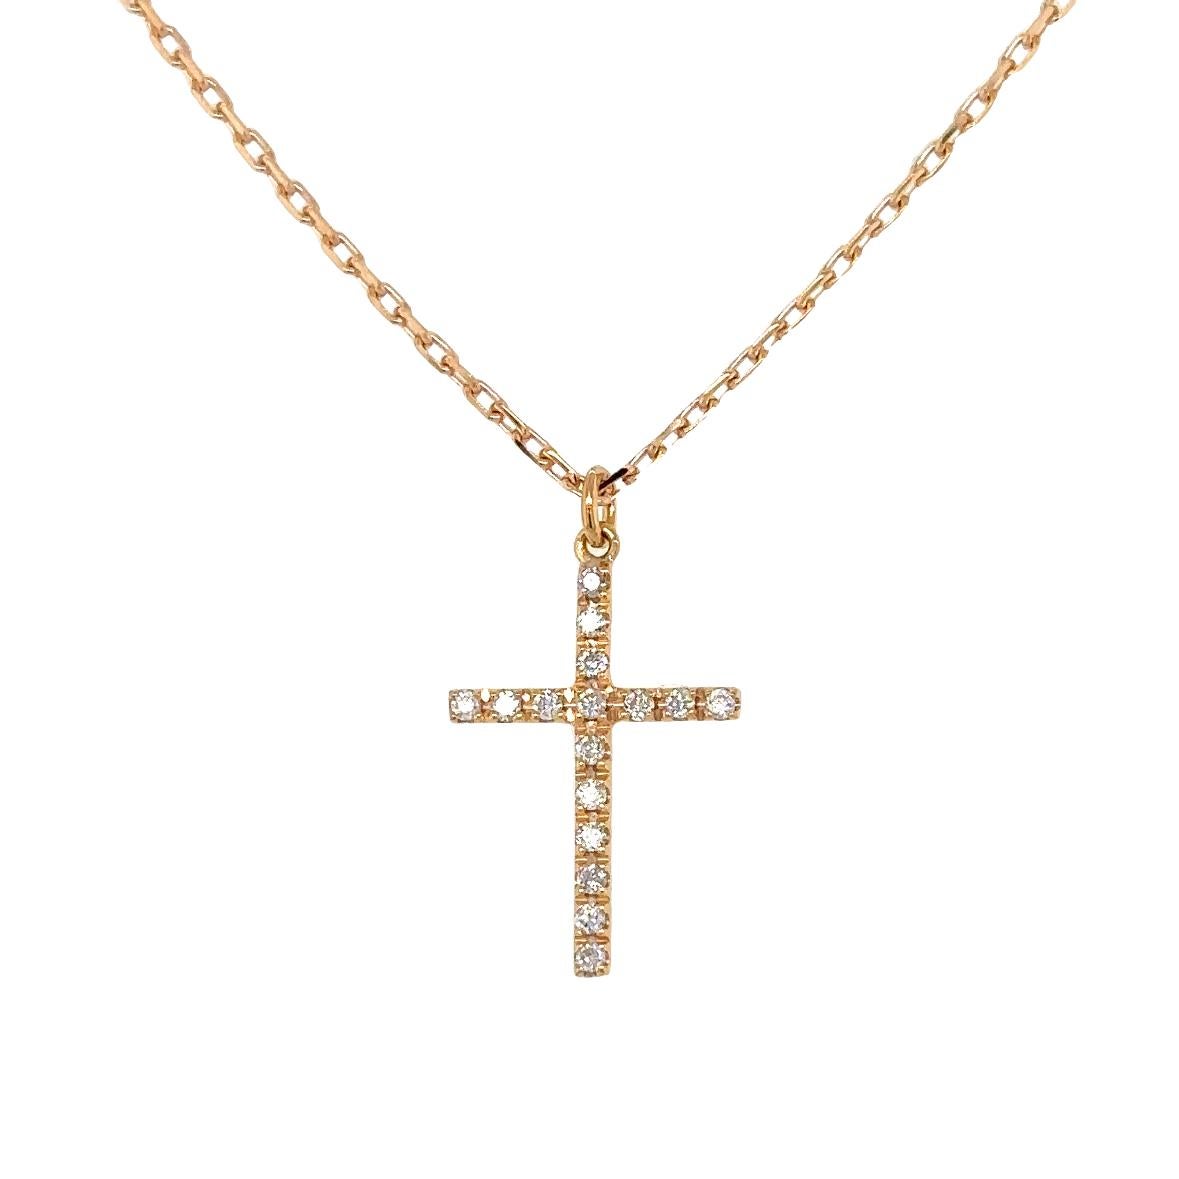 Timeless Necklace Cross in rose gold 18Kt 3.55 gr with Round Diamonds G Color VS Clarity in total 0.12 ct
The Timeless Collection was inspired by the endless elegance and sophistication of classic high-jewelry, eternizing its beauty and presenting a